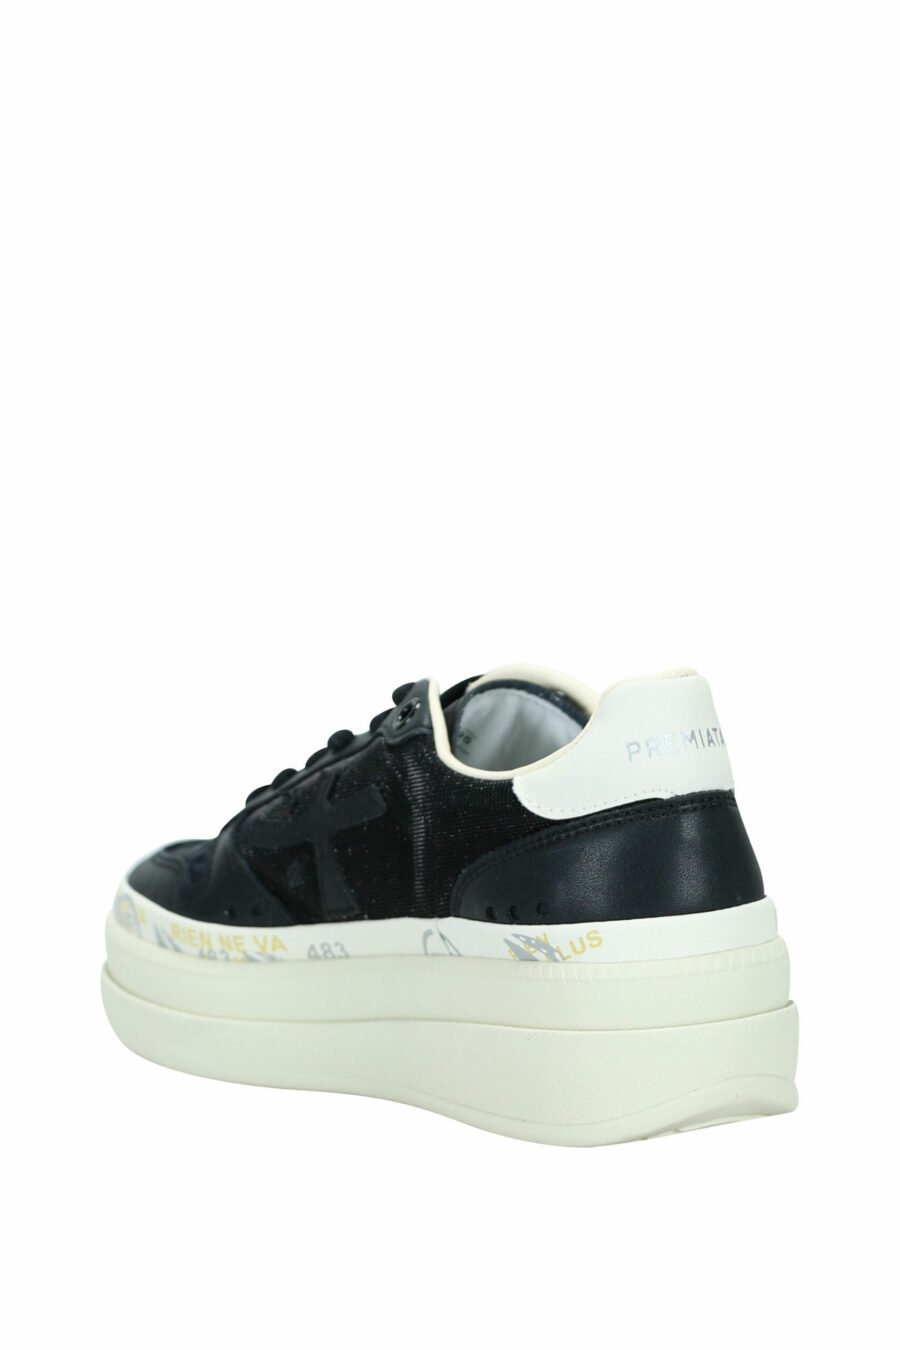 Black trainers with platform "Micol 6795" - 8053680377926 3 scaled